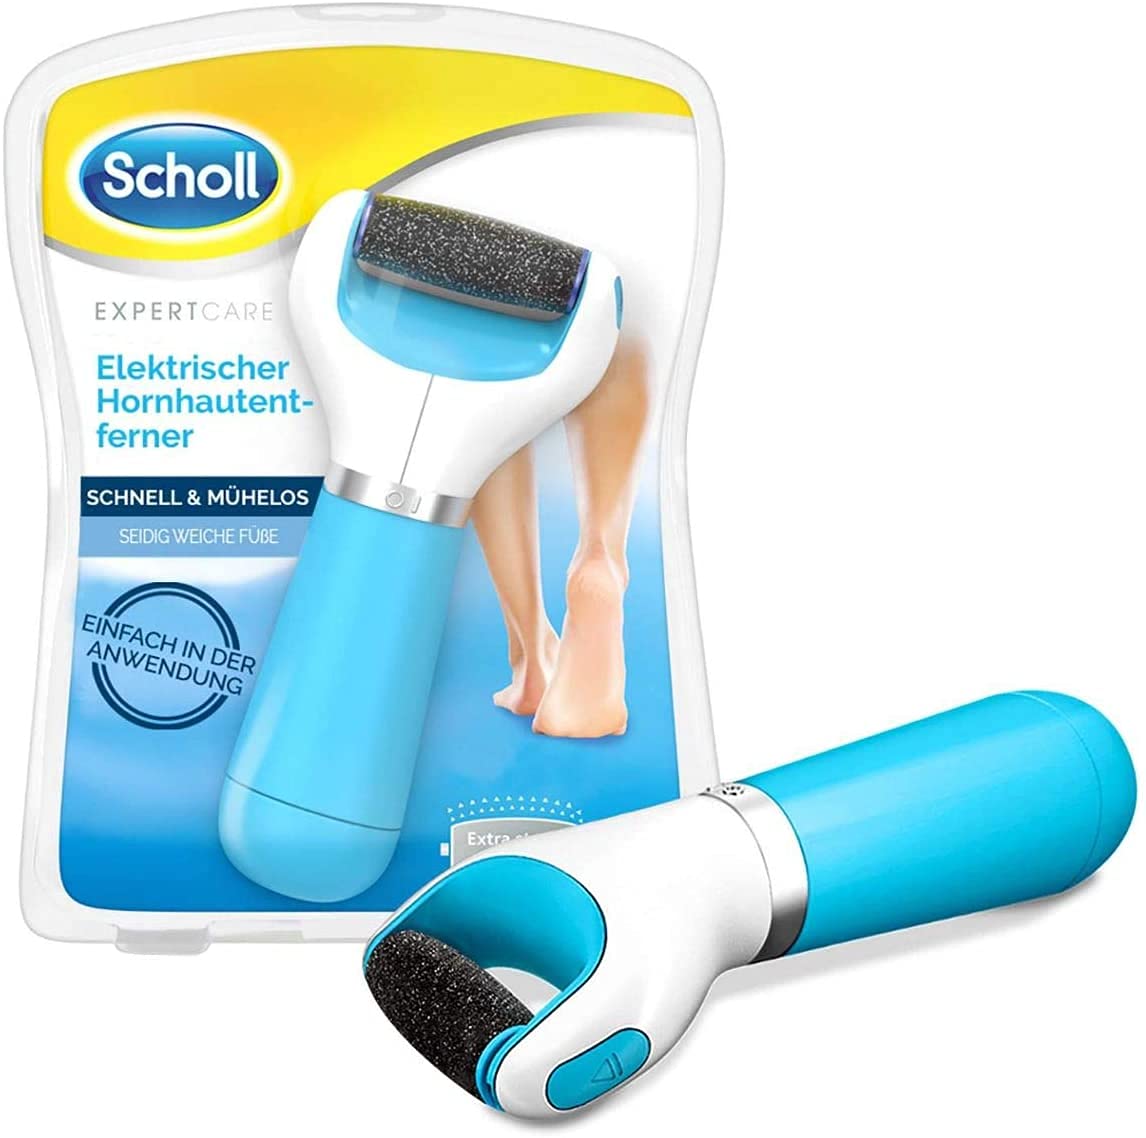 Scholl Velvet Smooth Express Pedi Foot File With Diamond Crystals (Blue)